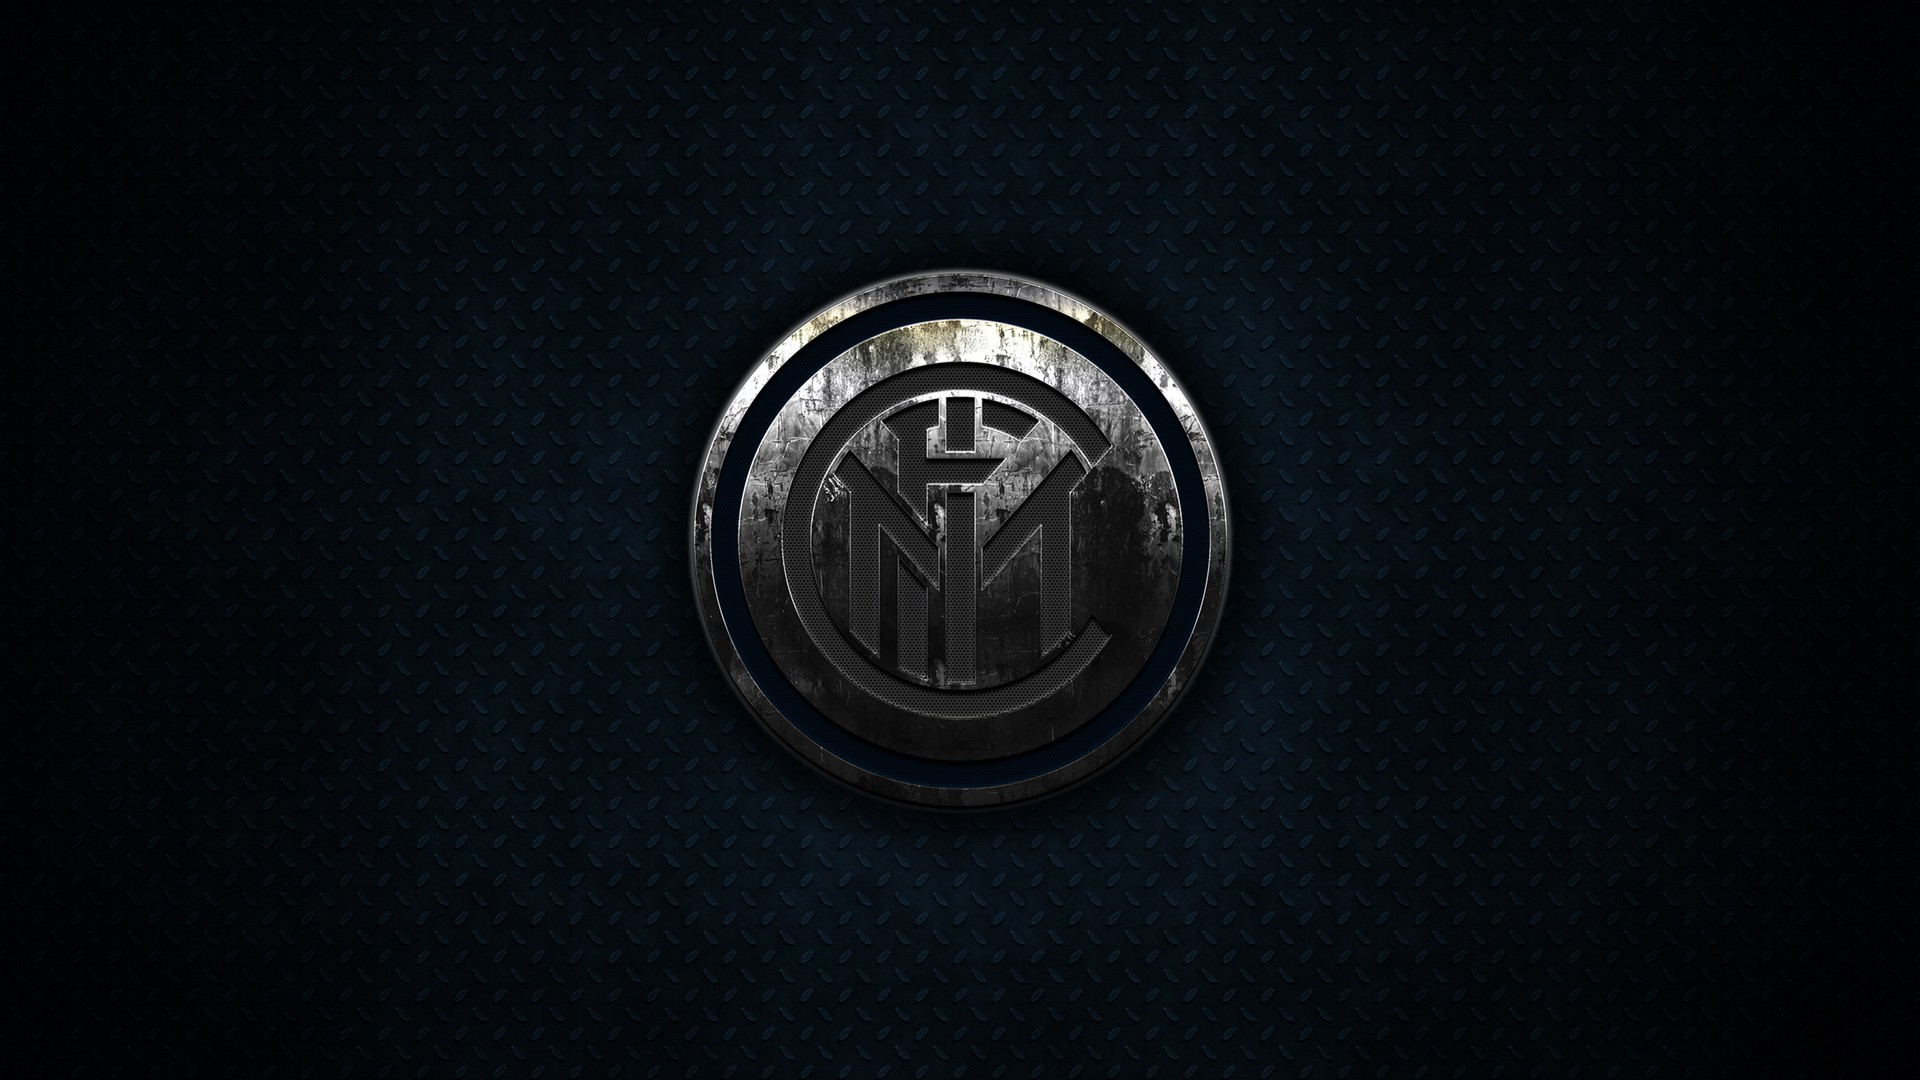 Inter Milan Wallpaper HD with high-resolution 1920x1080 pixel. You can use this wallpaper for your Desktop Computers, Mac Screensavers, Windows Backgrounds, iPhone Wallpapers, Tablet or Android Lock screen and another Mobile device